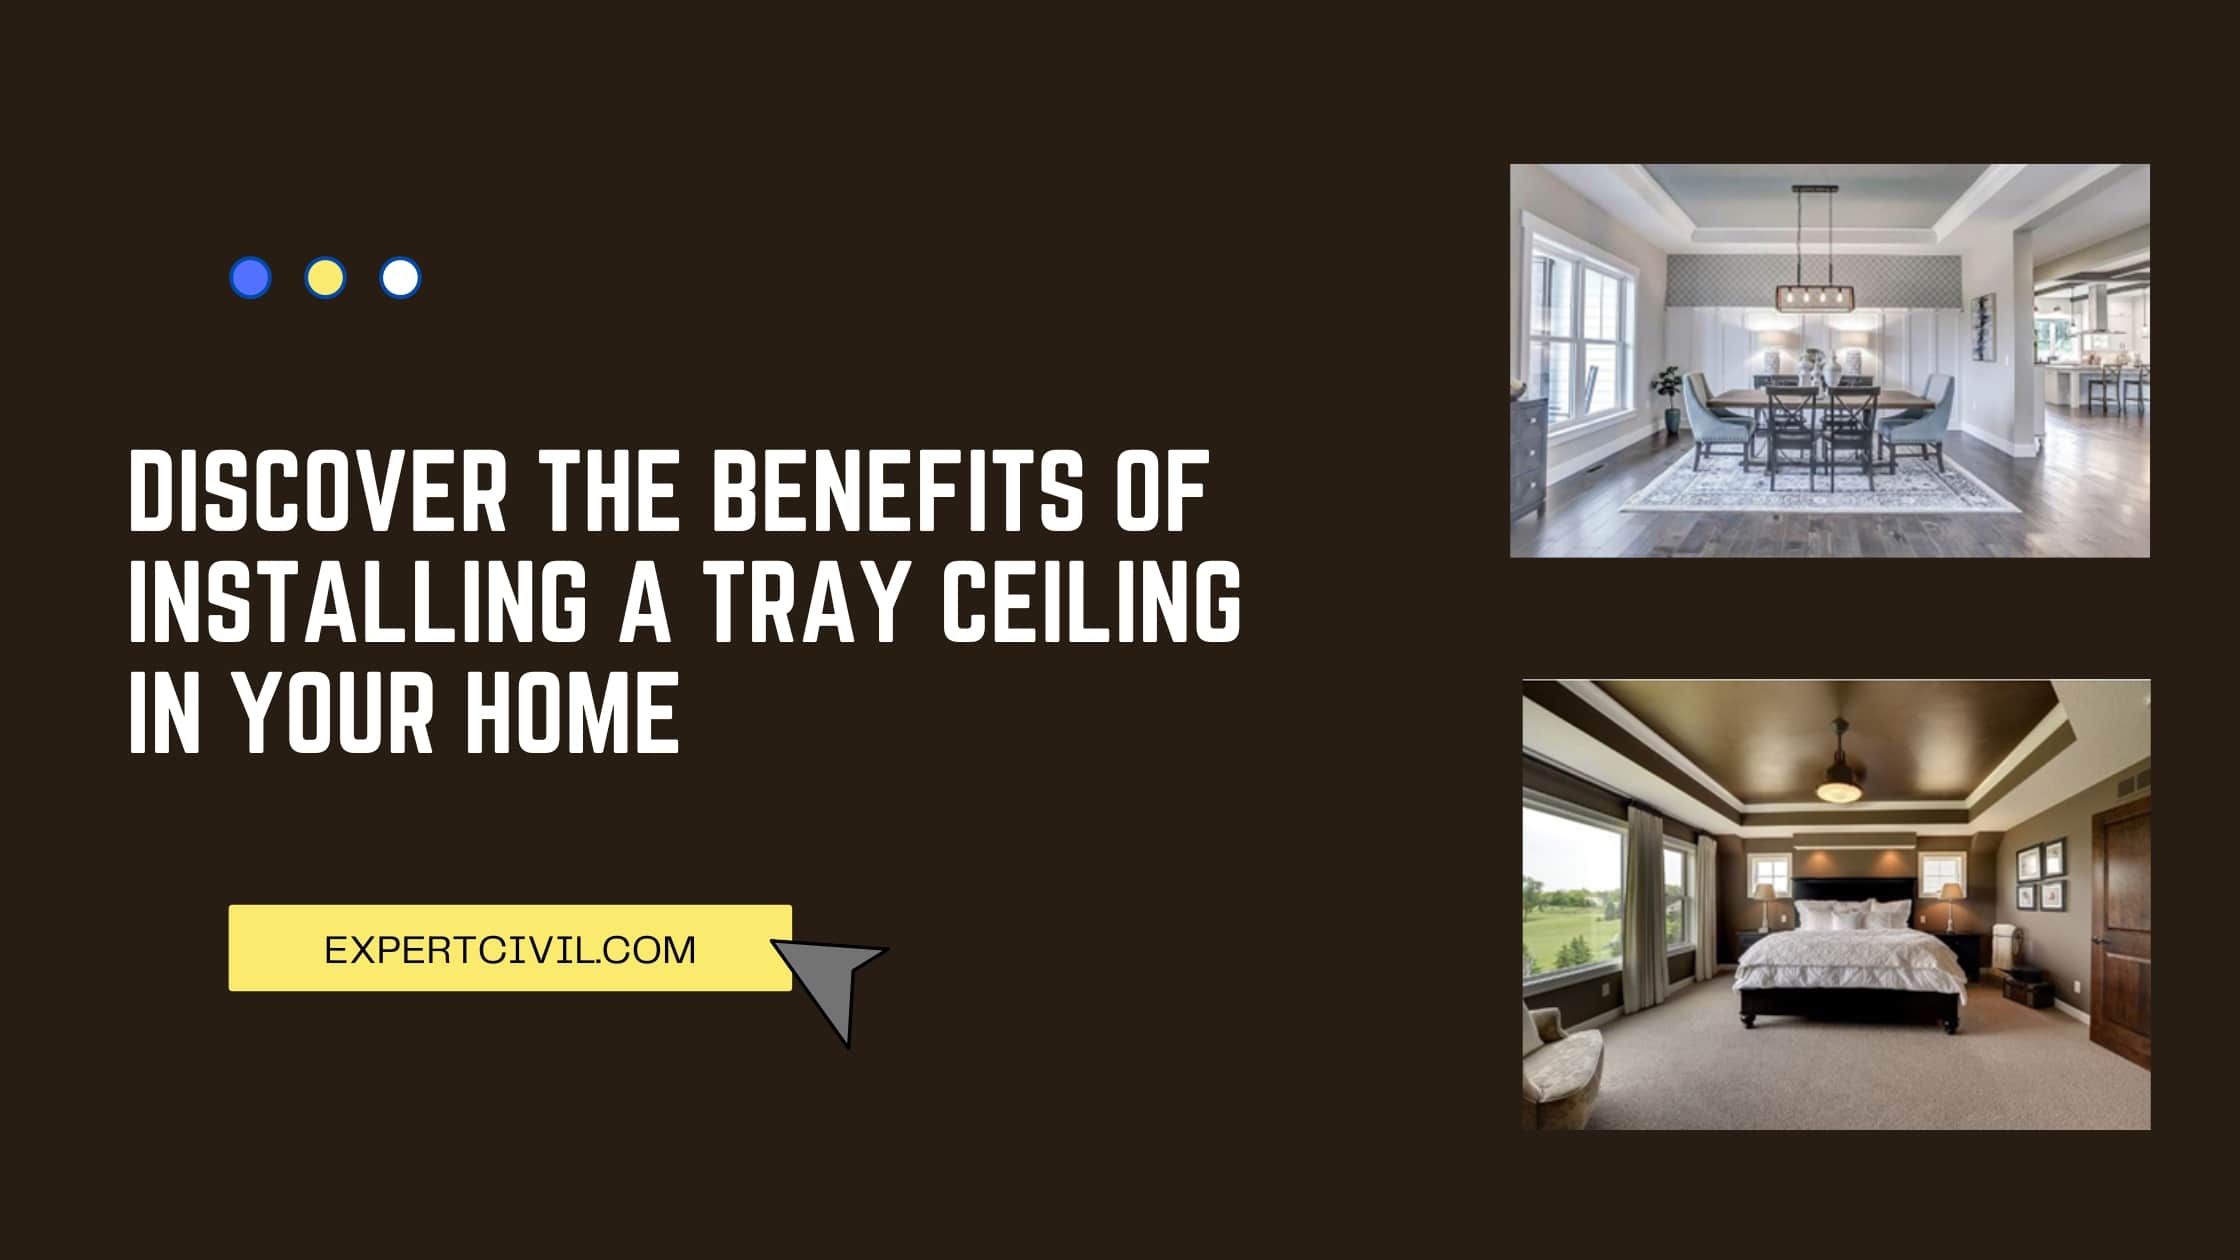 Discover the Benefits of Installing a Tray Ceiling in Your Home